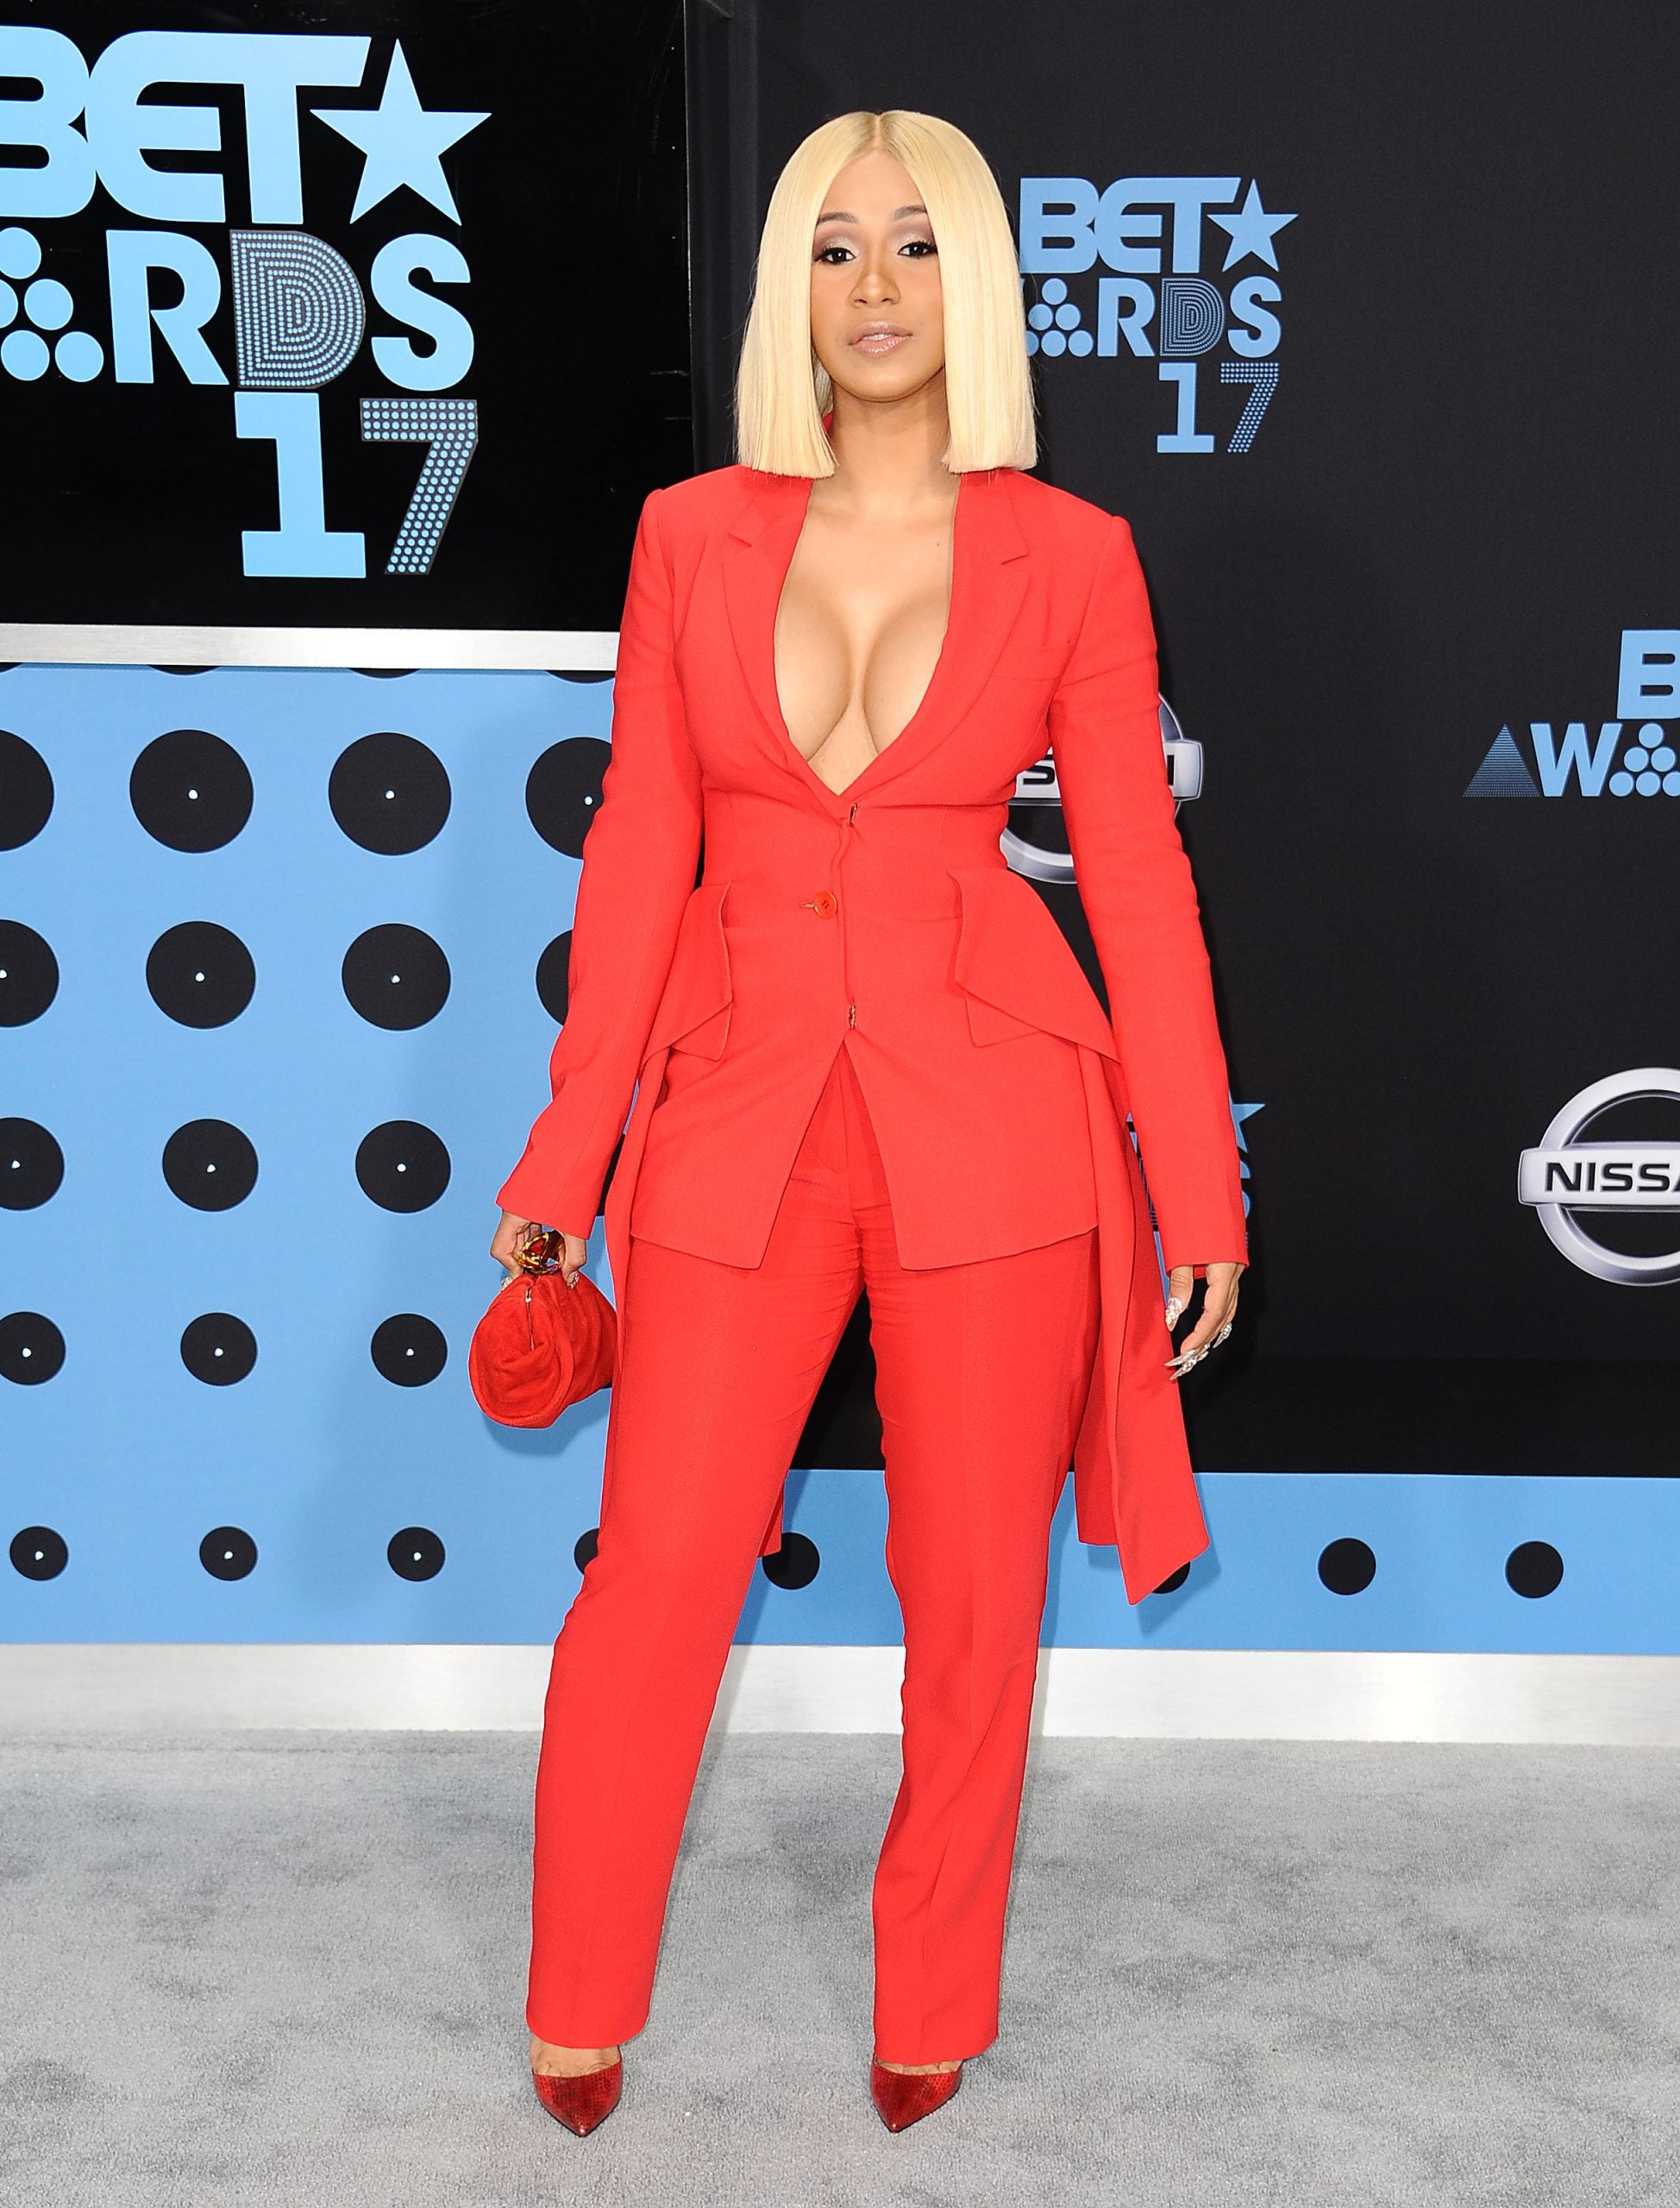 Our Favorite BET Awards Looks From The Past